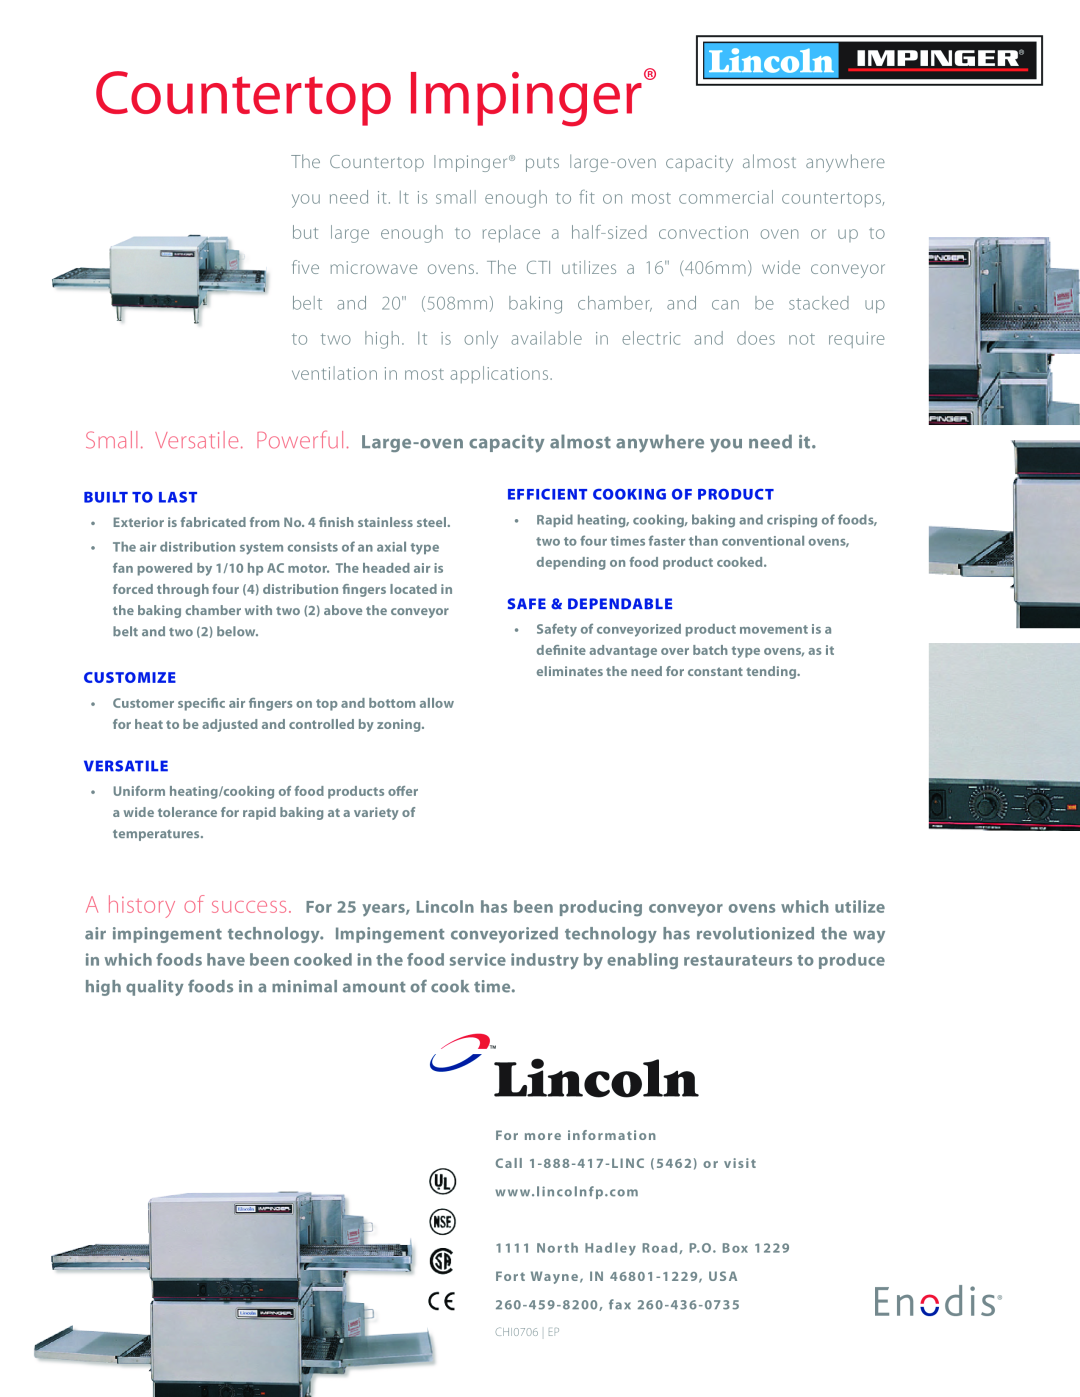 Lincoln Countertop Impinger manual Built To Last, Customize, Efficient Cooking Of Product, Safe & Dependable, Versatile 